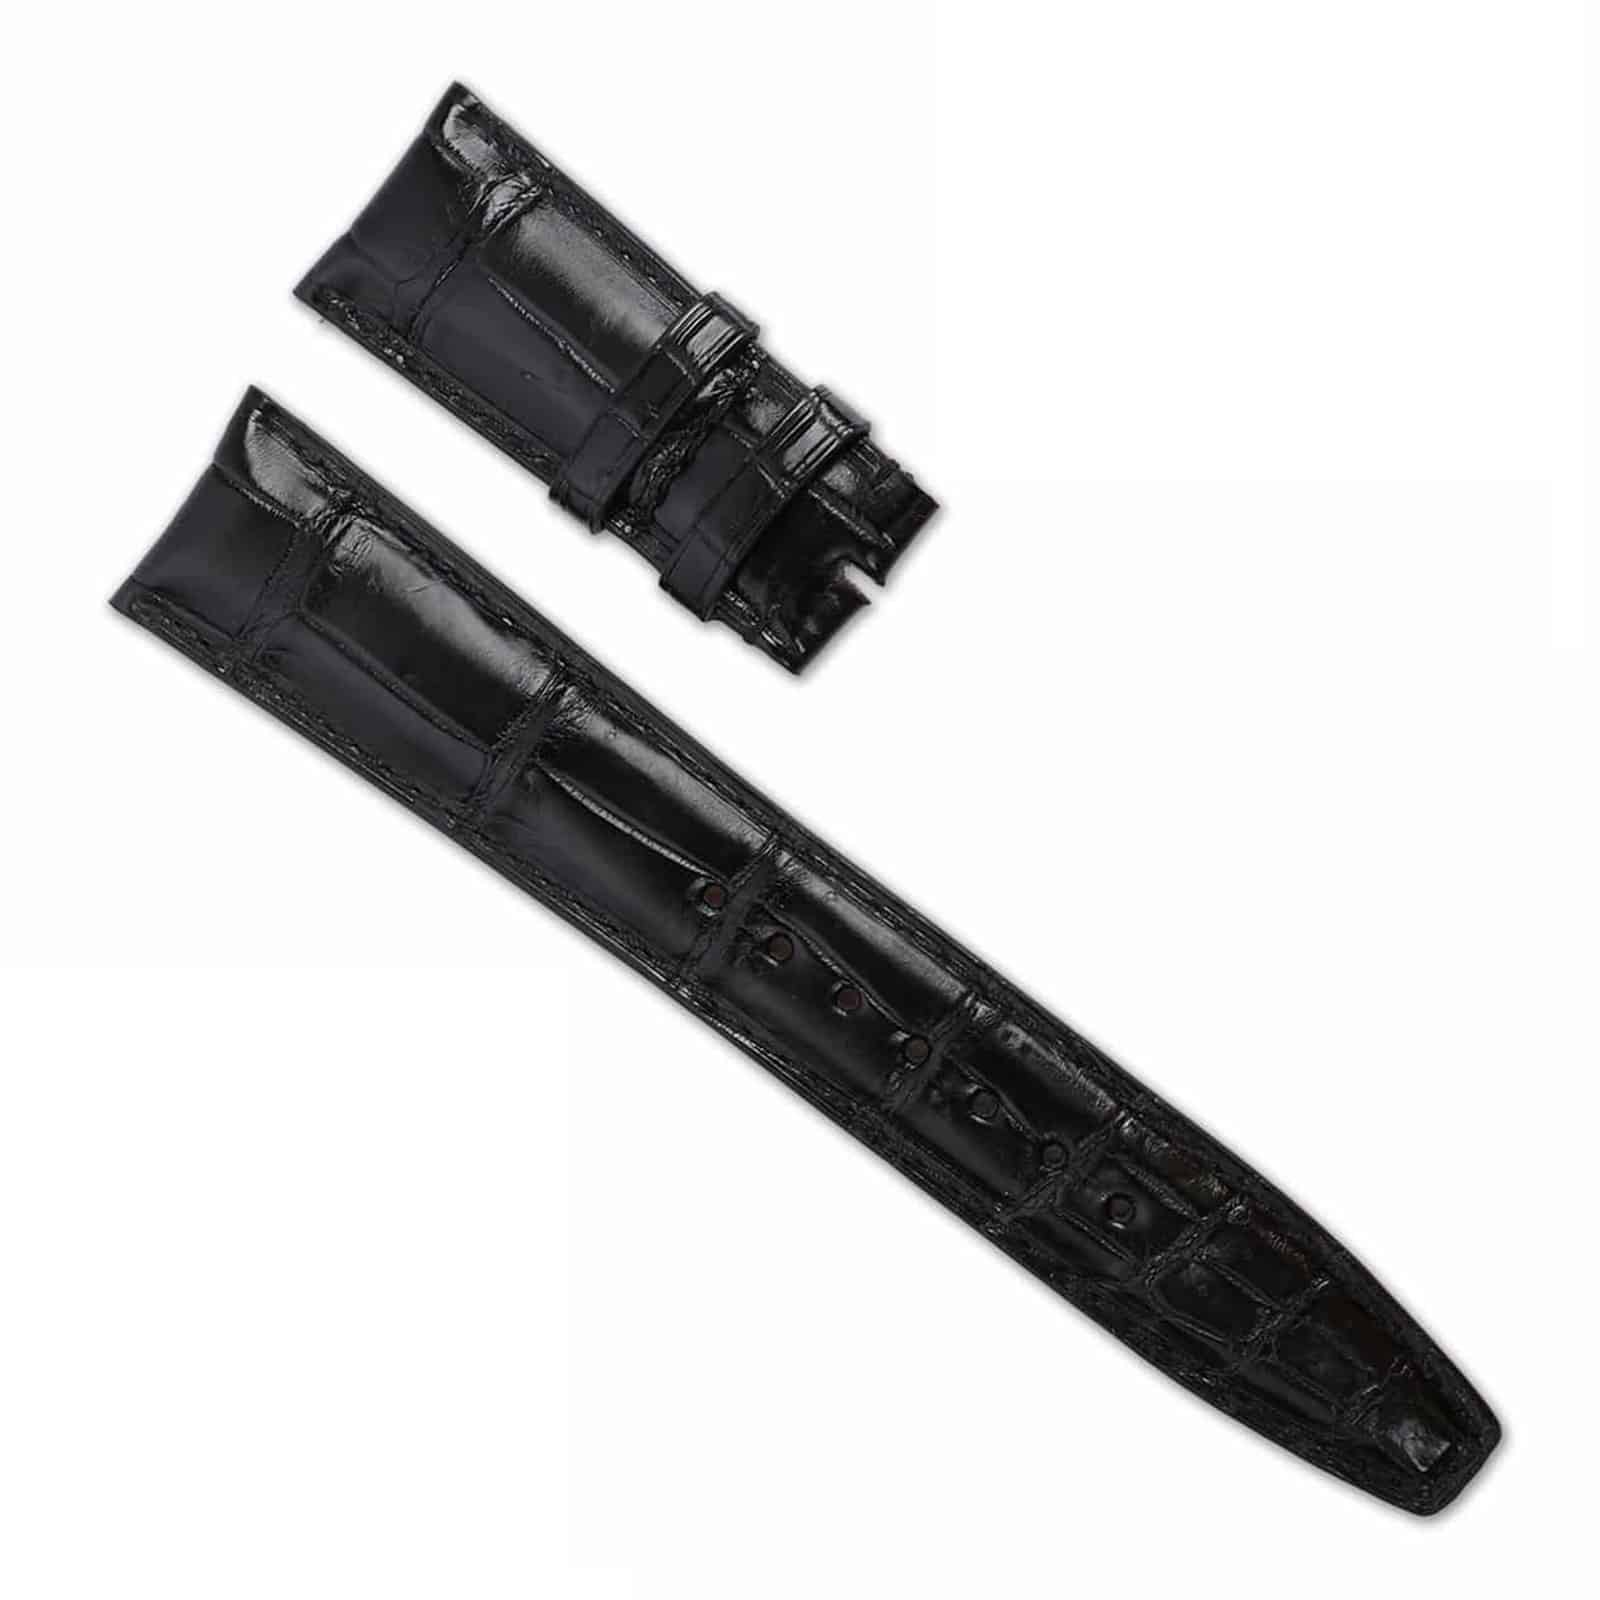 22mm custom replacement black leather watch band curved end fit for IWC Portuguese watchstrap